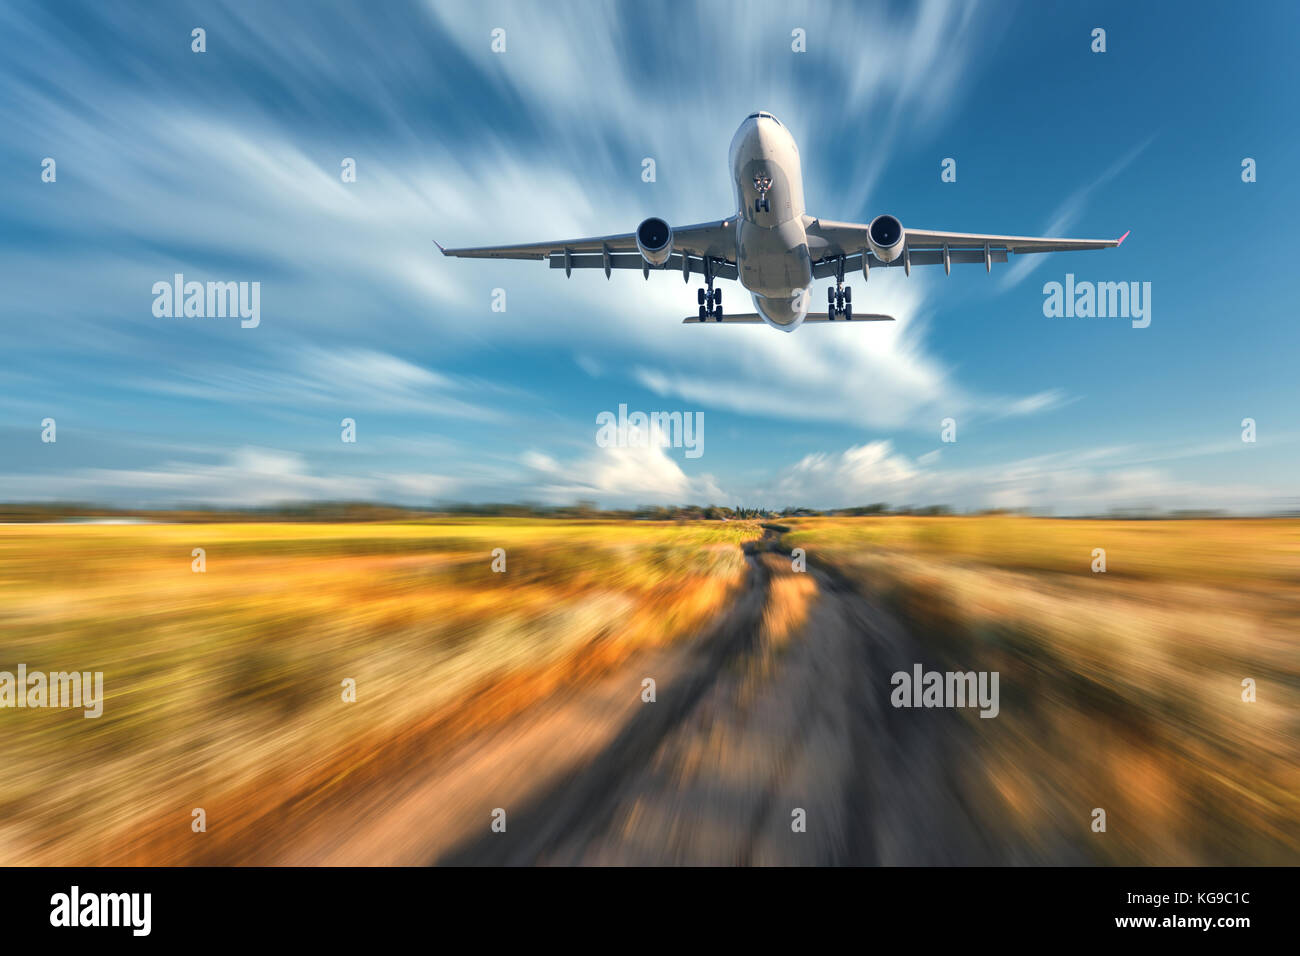 Airplane with motion blur effect. Landscape with flying passenger airplane and blurred blue sky with clouds, orange grass field with trail at sunset.  Stock Photo